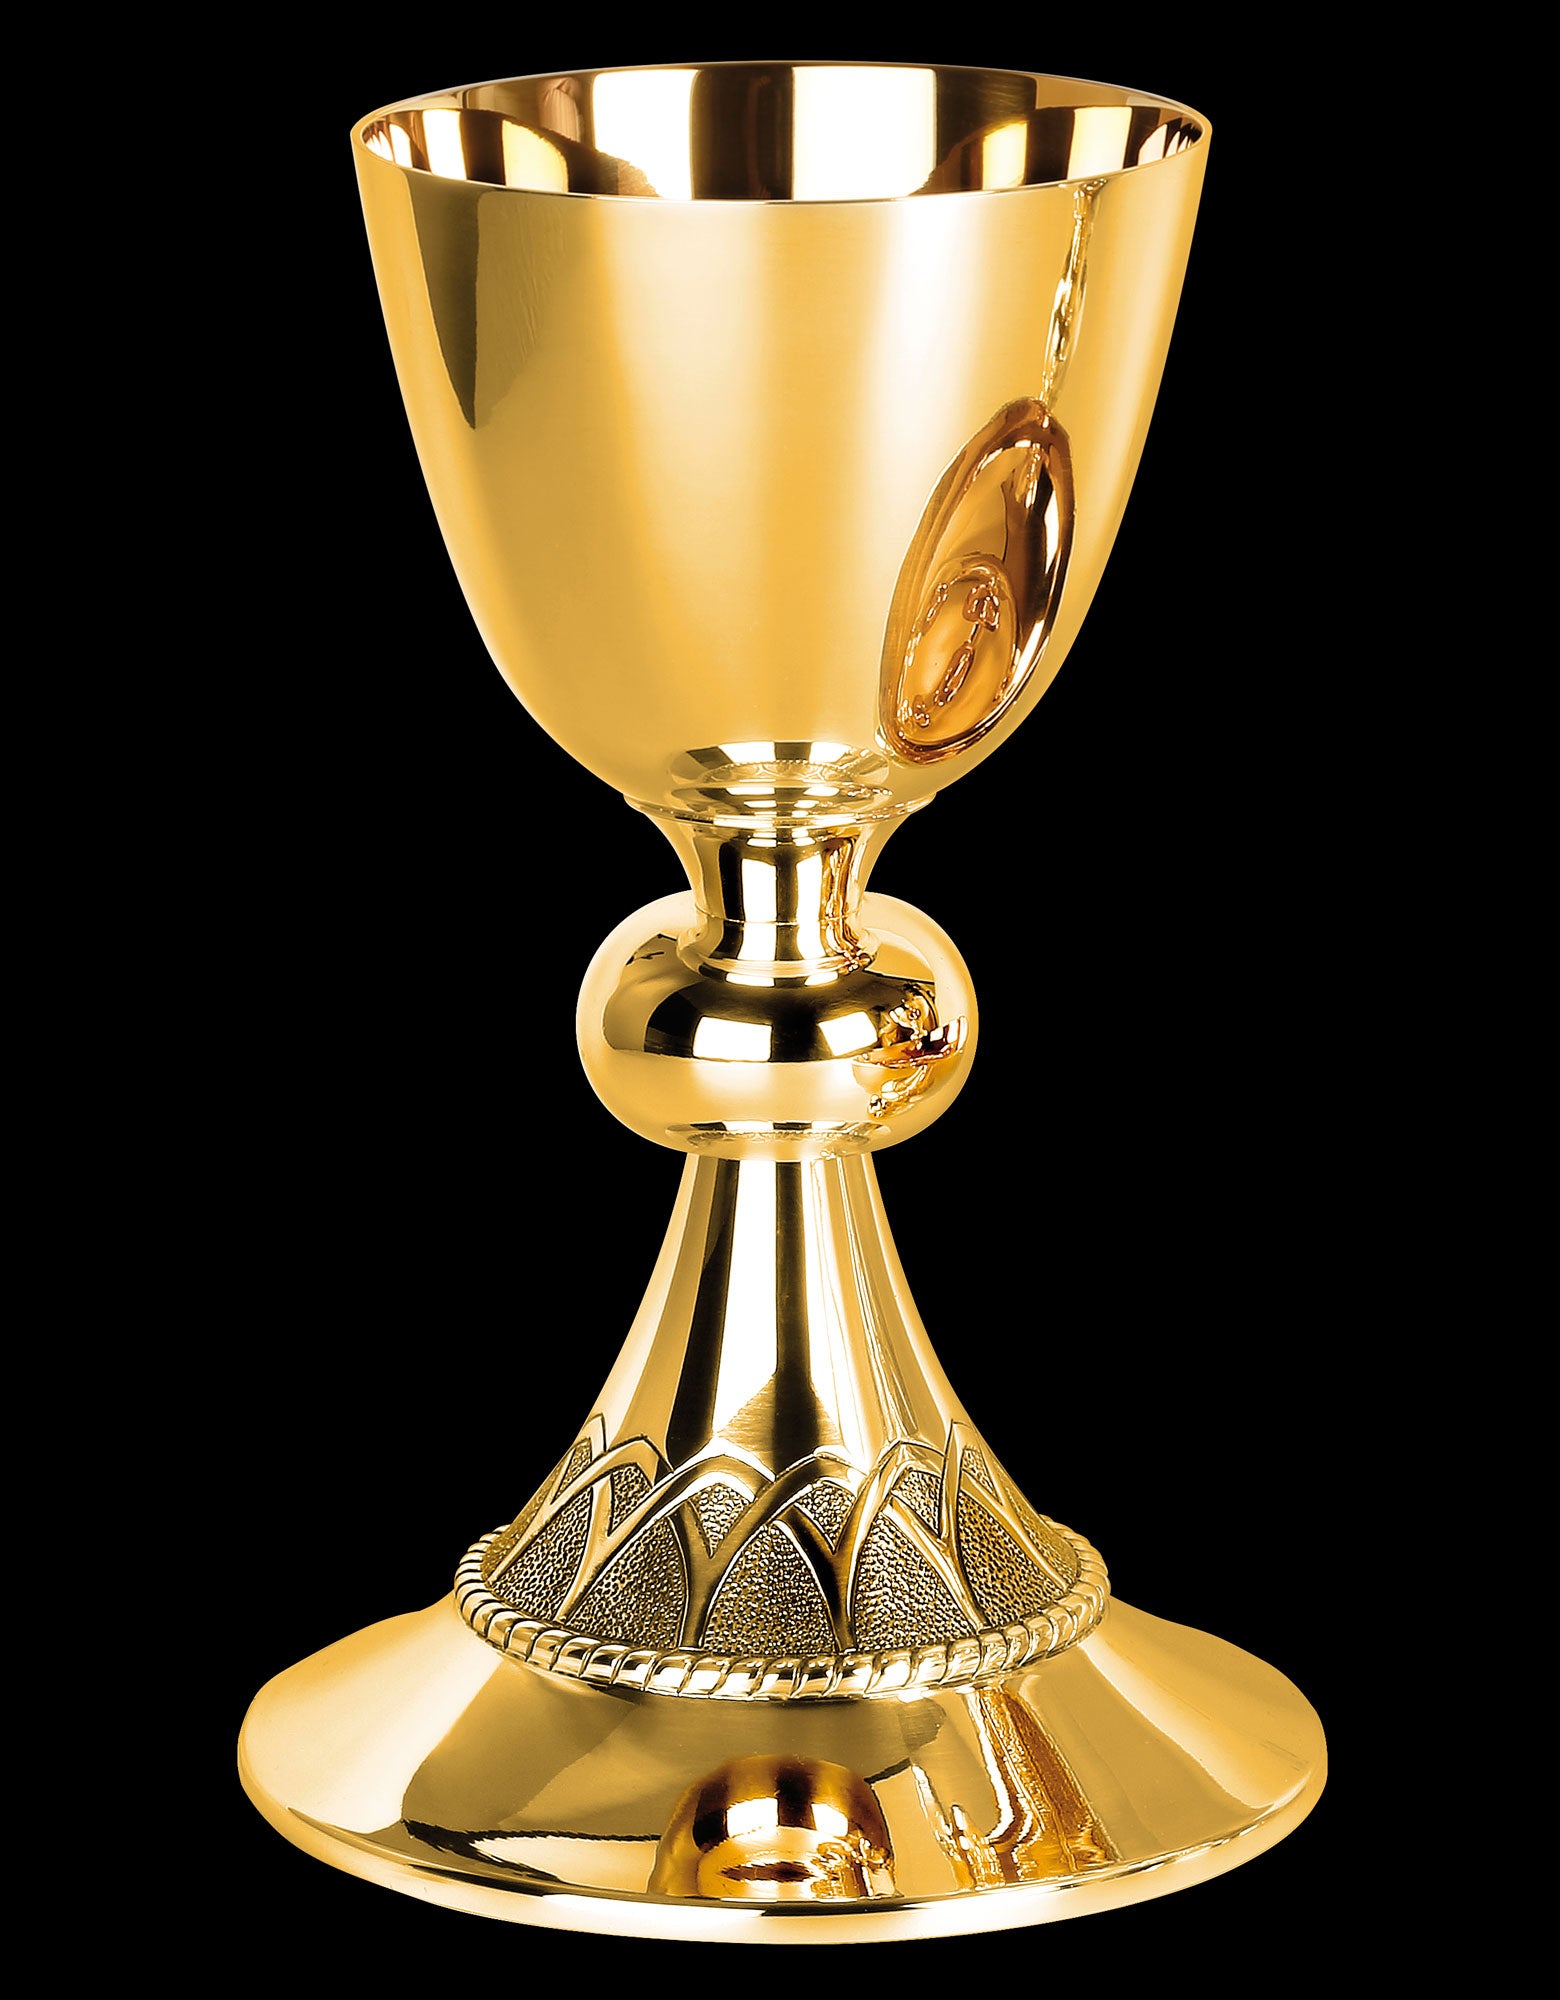 gold-chalice-rope-design-pope-francis-5415.jpg